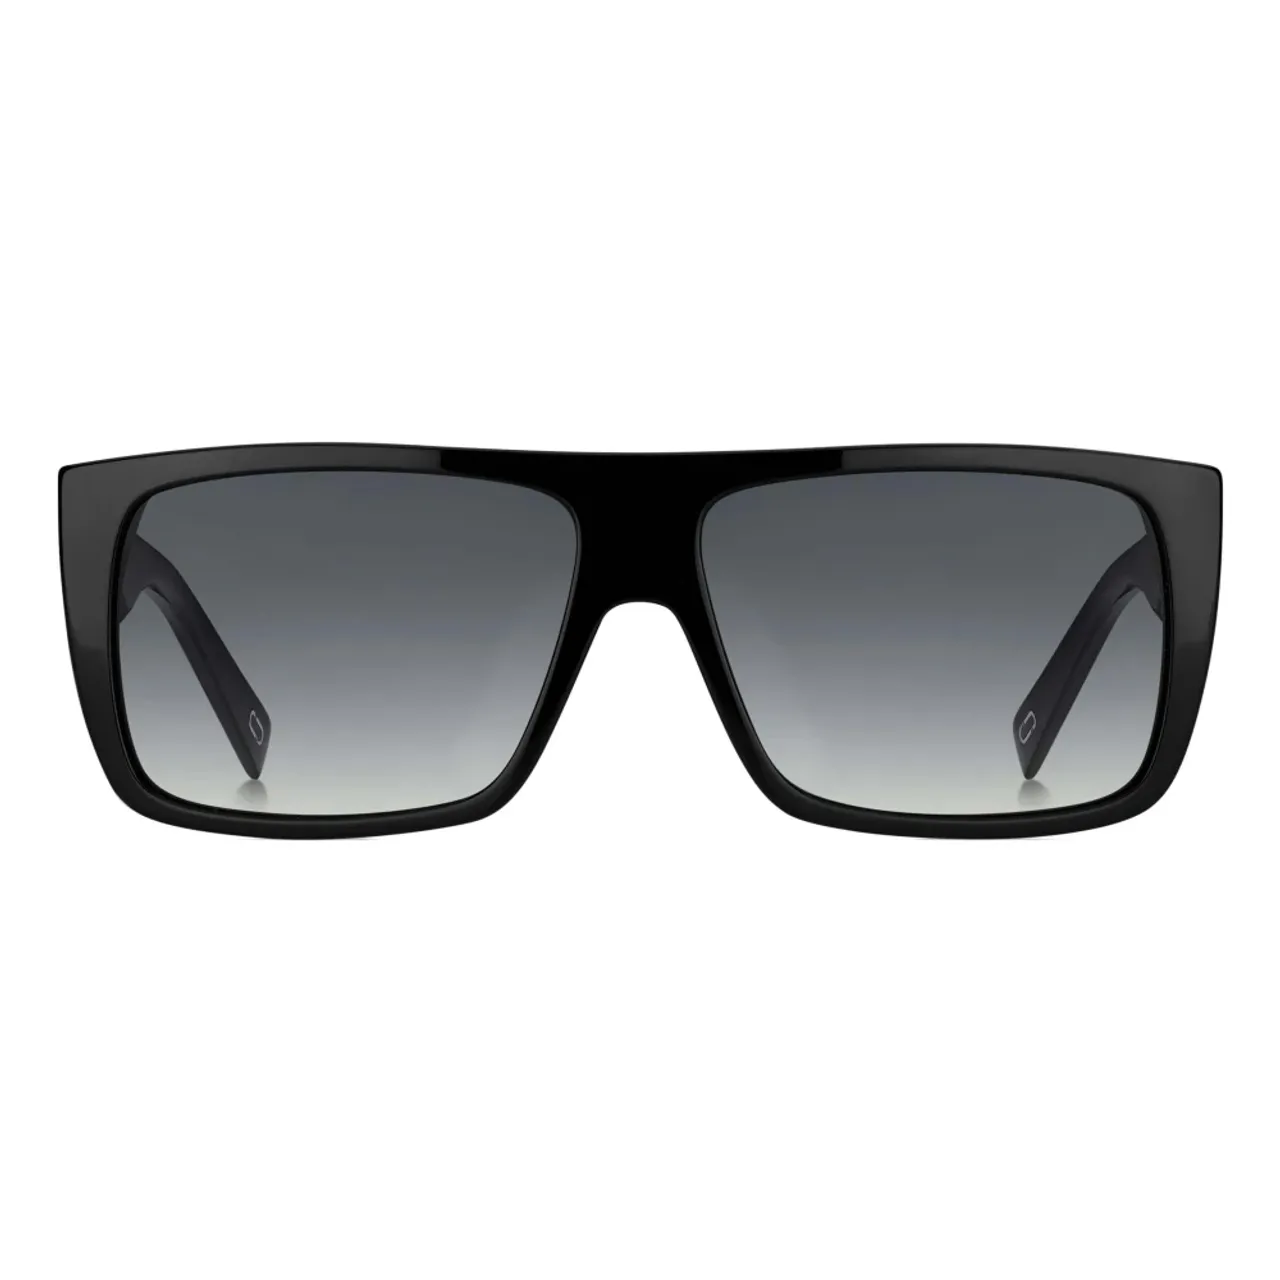 Marc Jacobs , Black Grey Sungles - Style 096/S 08A ,Black male, Sizes: